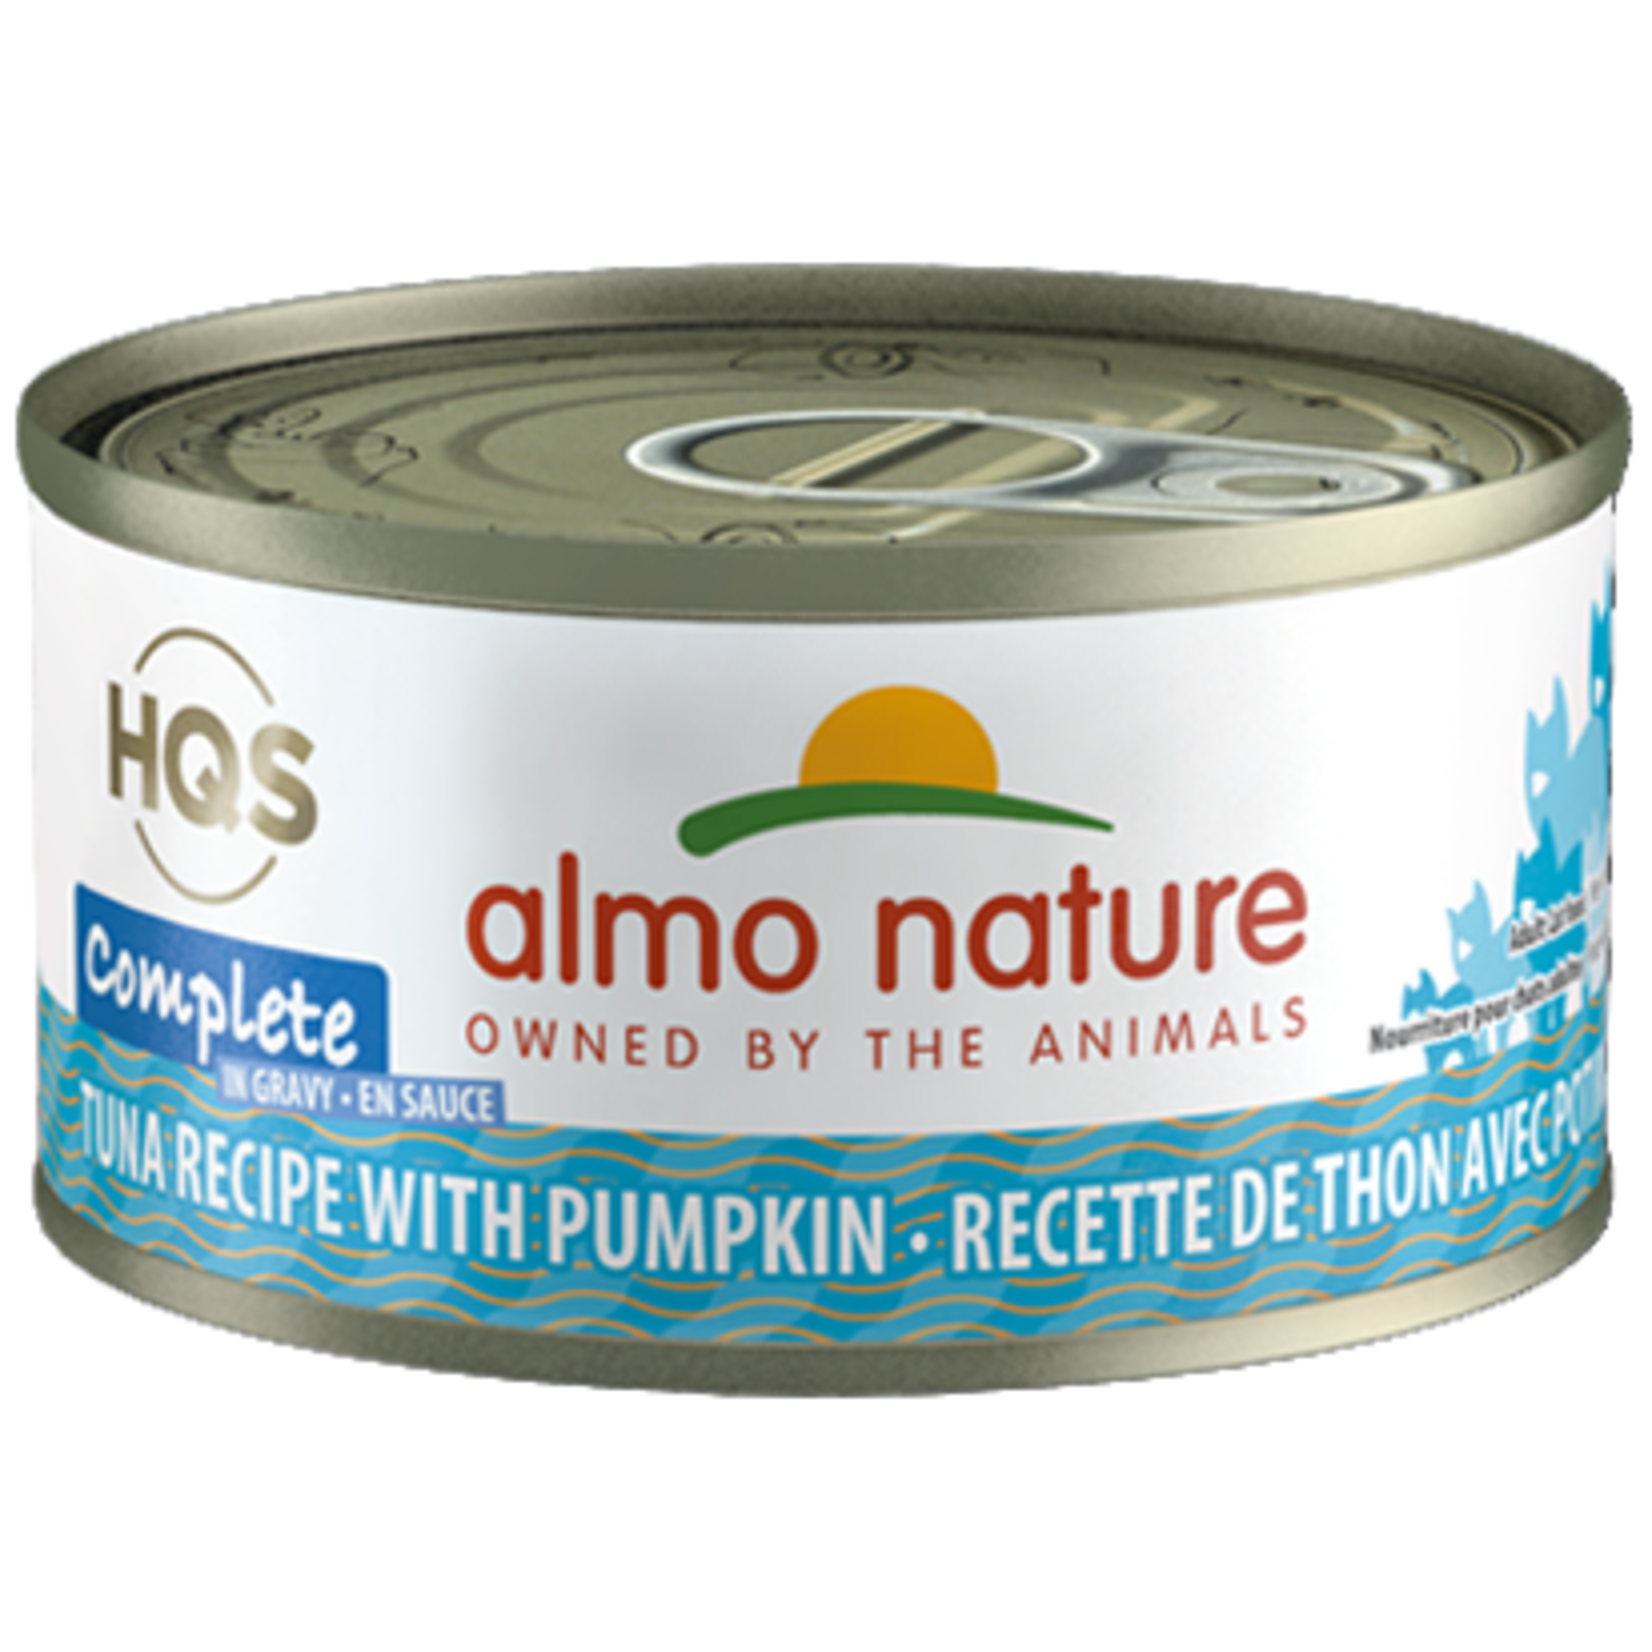 Almo Nature ALMO NATURE Tuna with Pumpkin Canned Cat Food 2.47oz